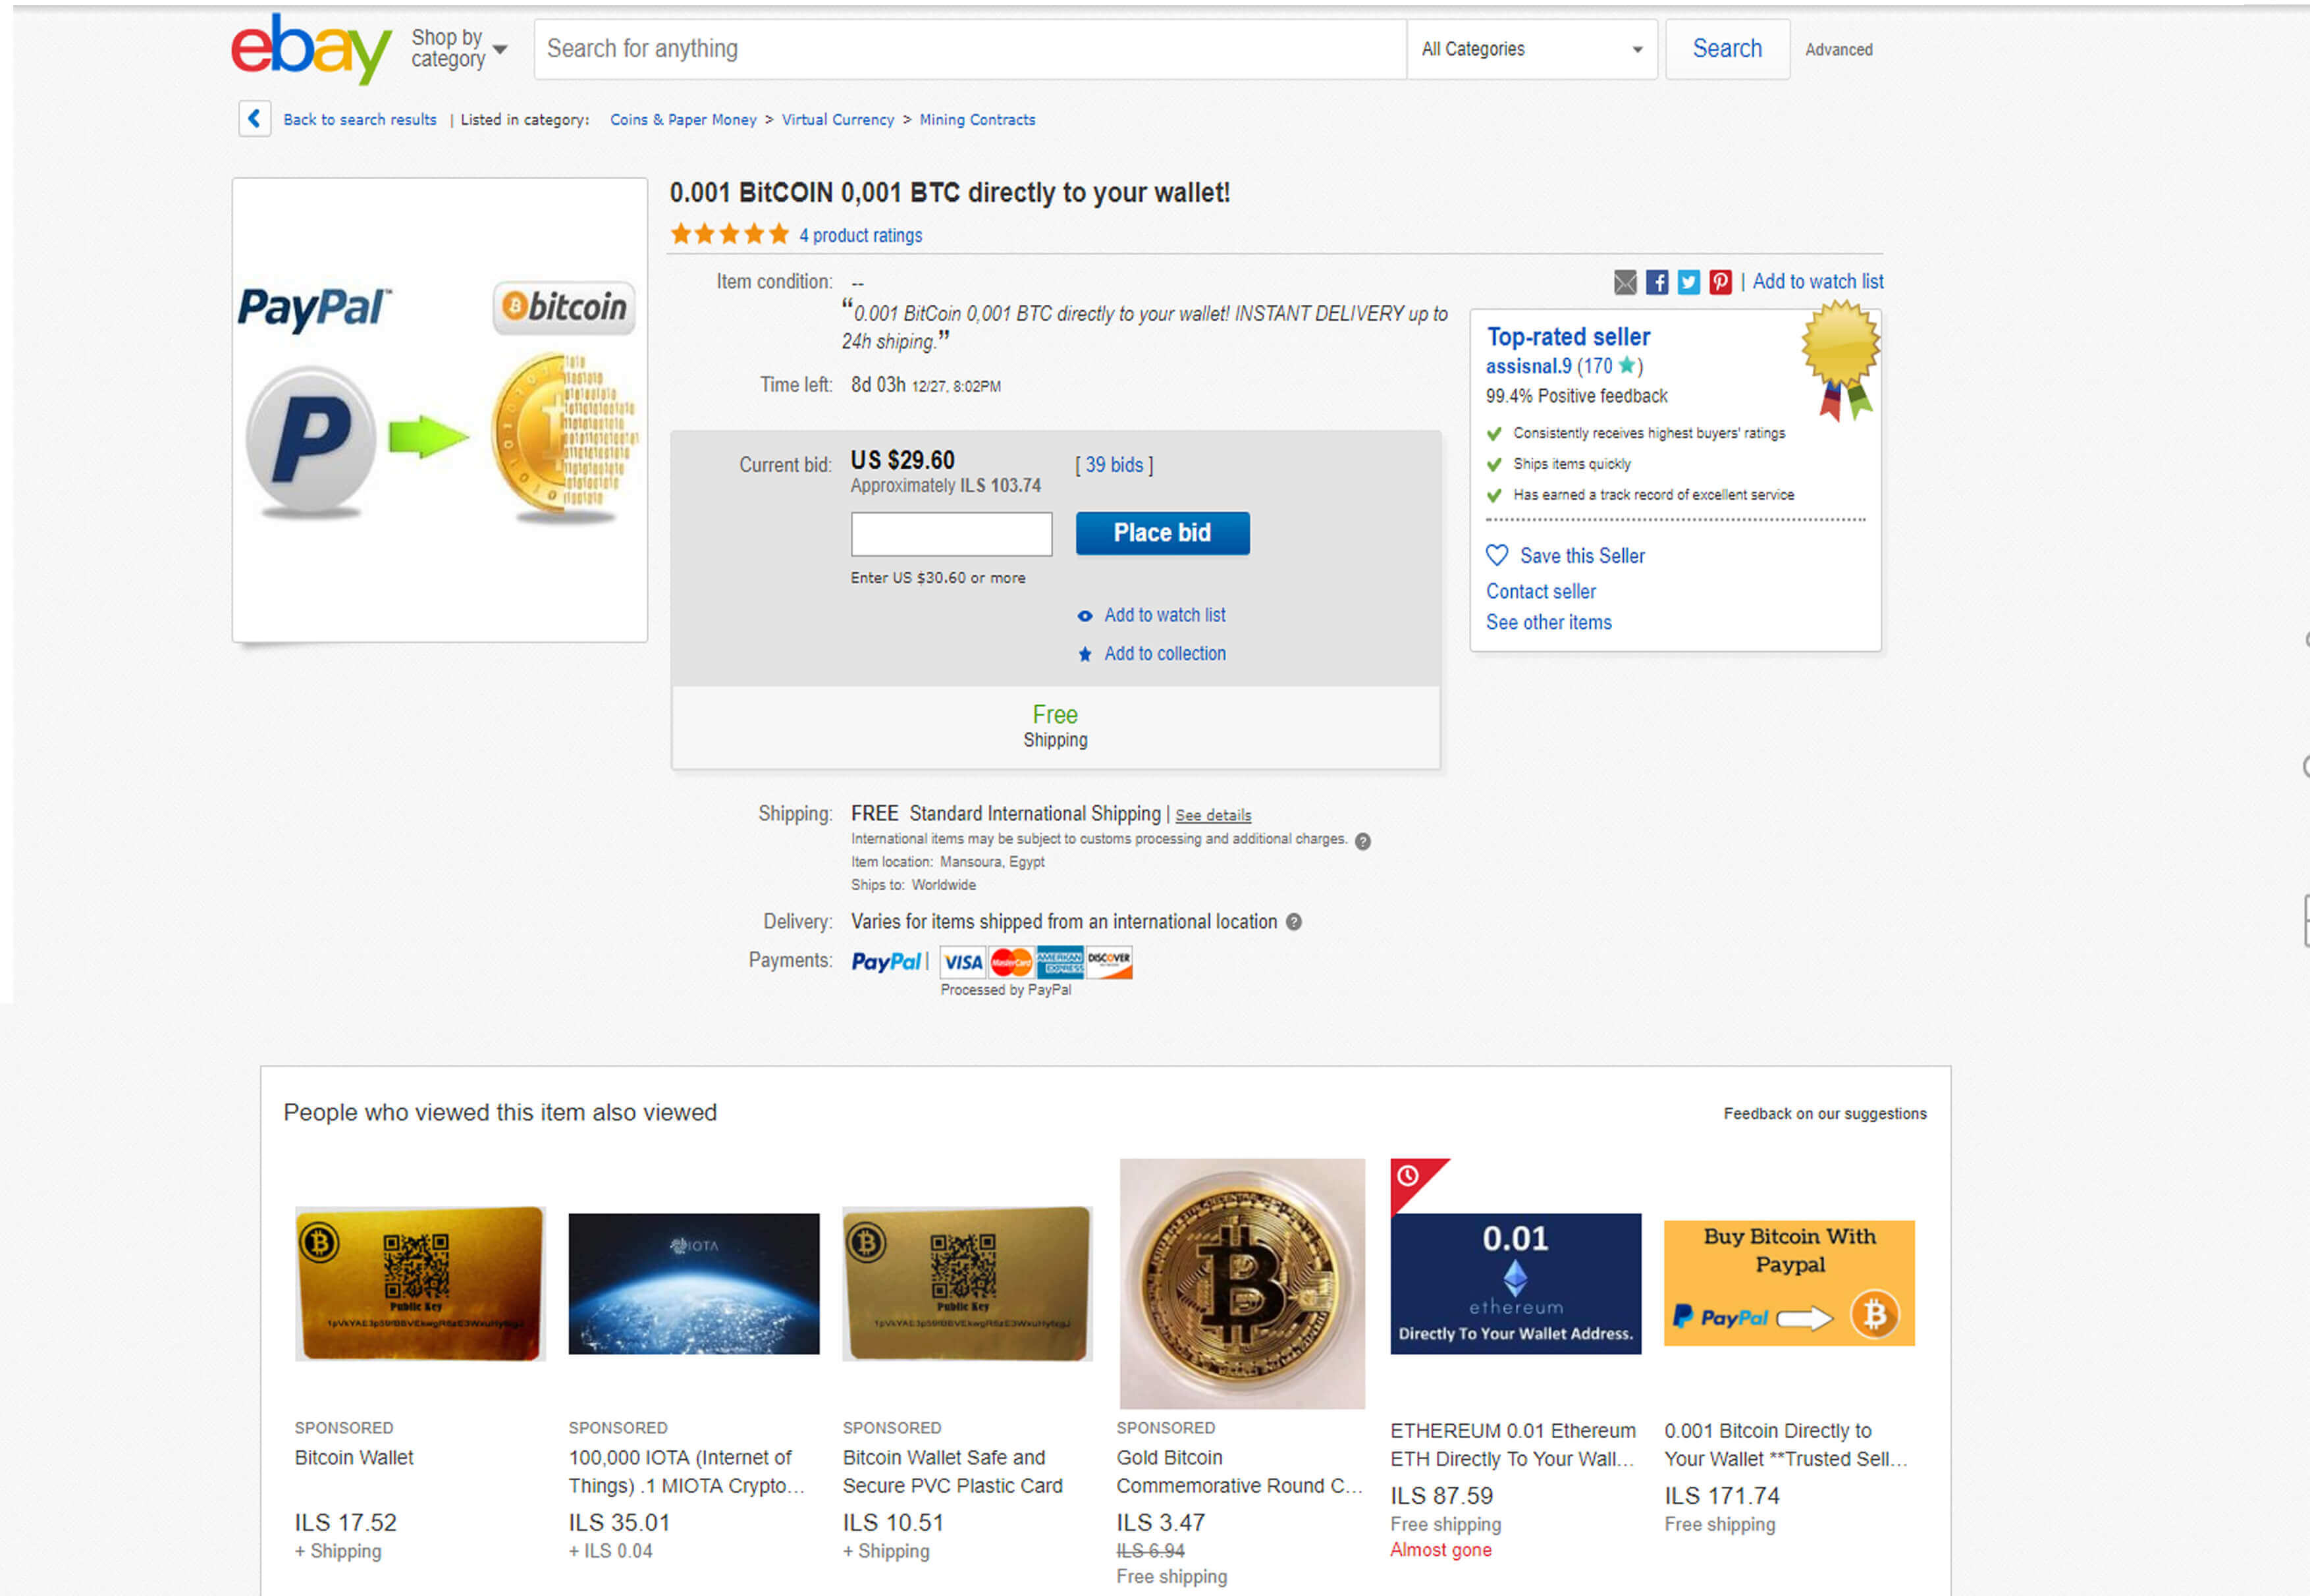 how can I get paid in bitcoin on ebay? - The eBay Canada Community